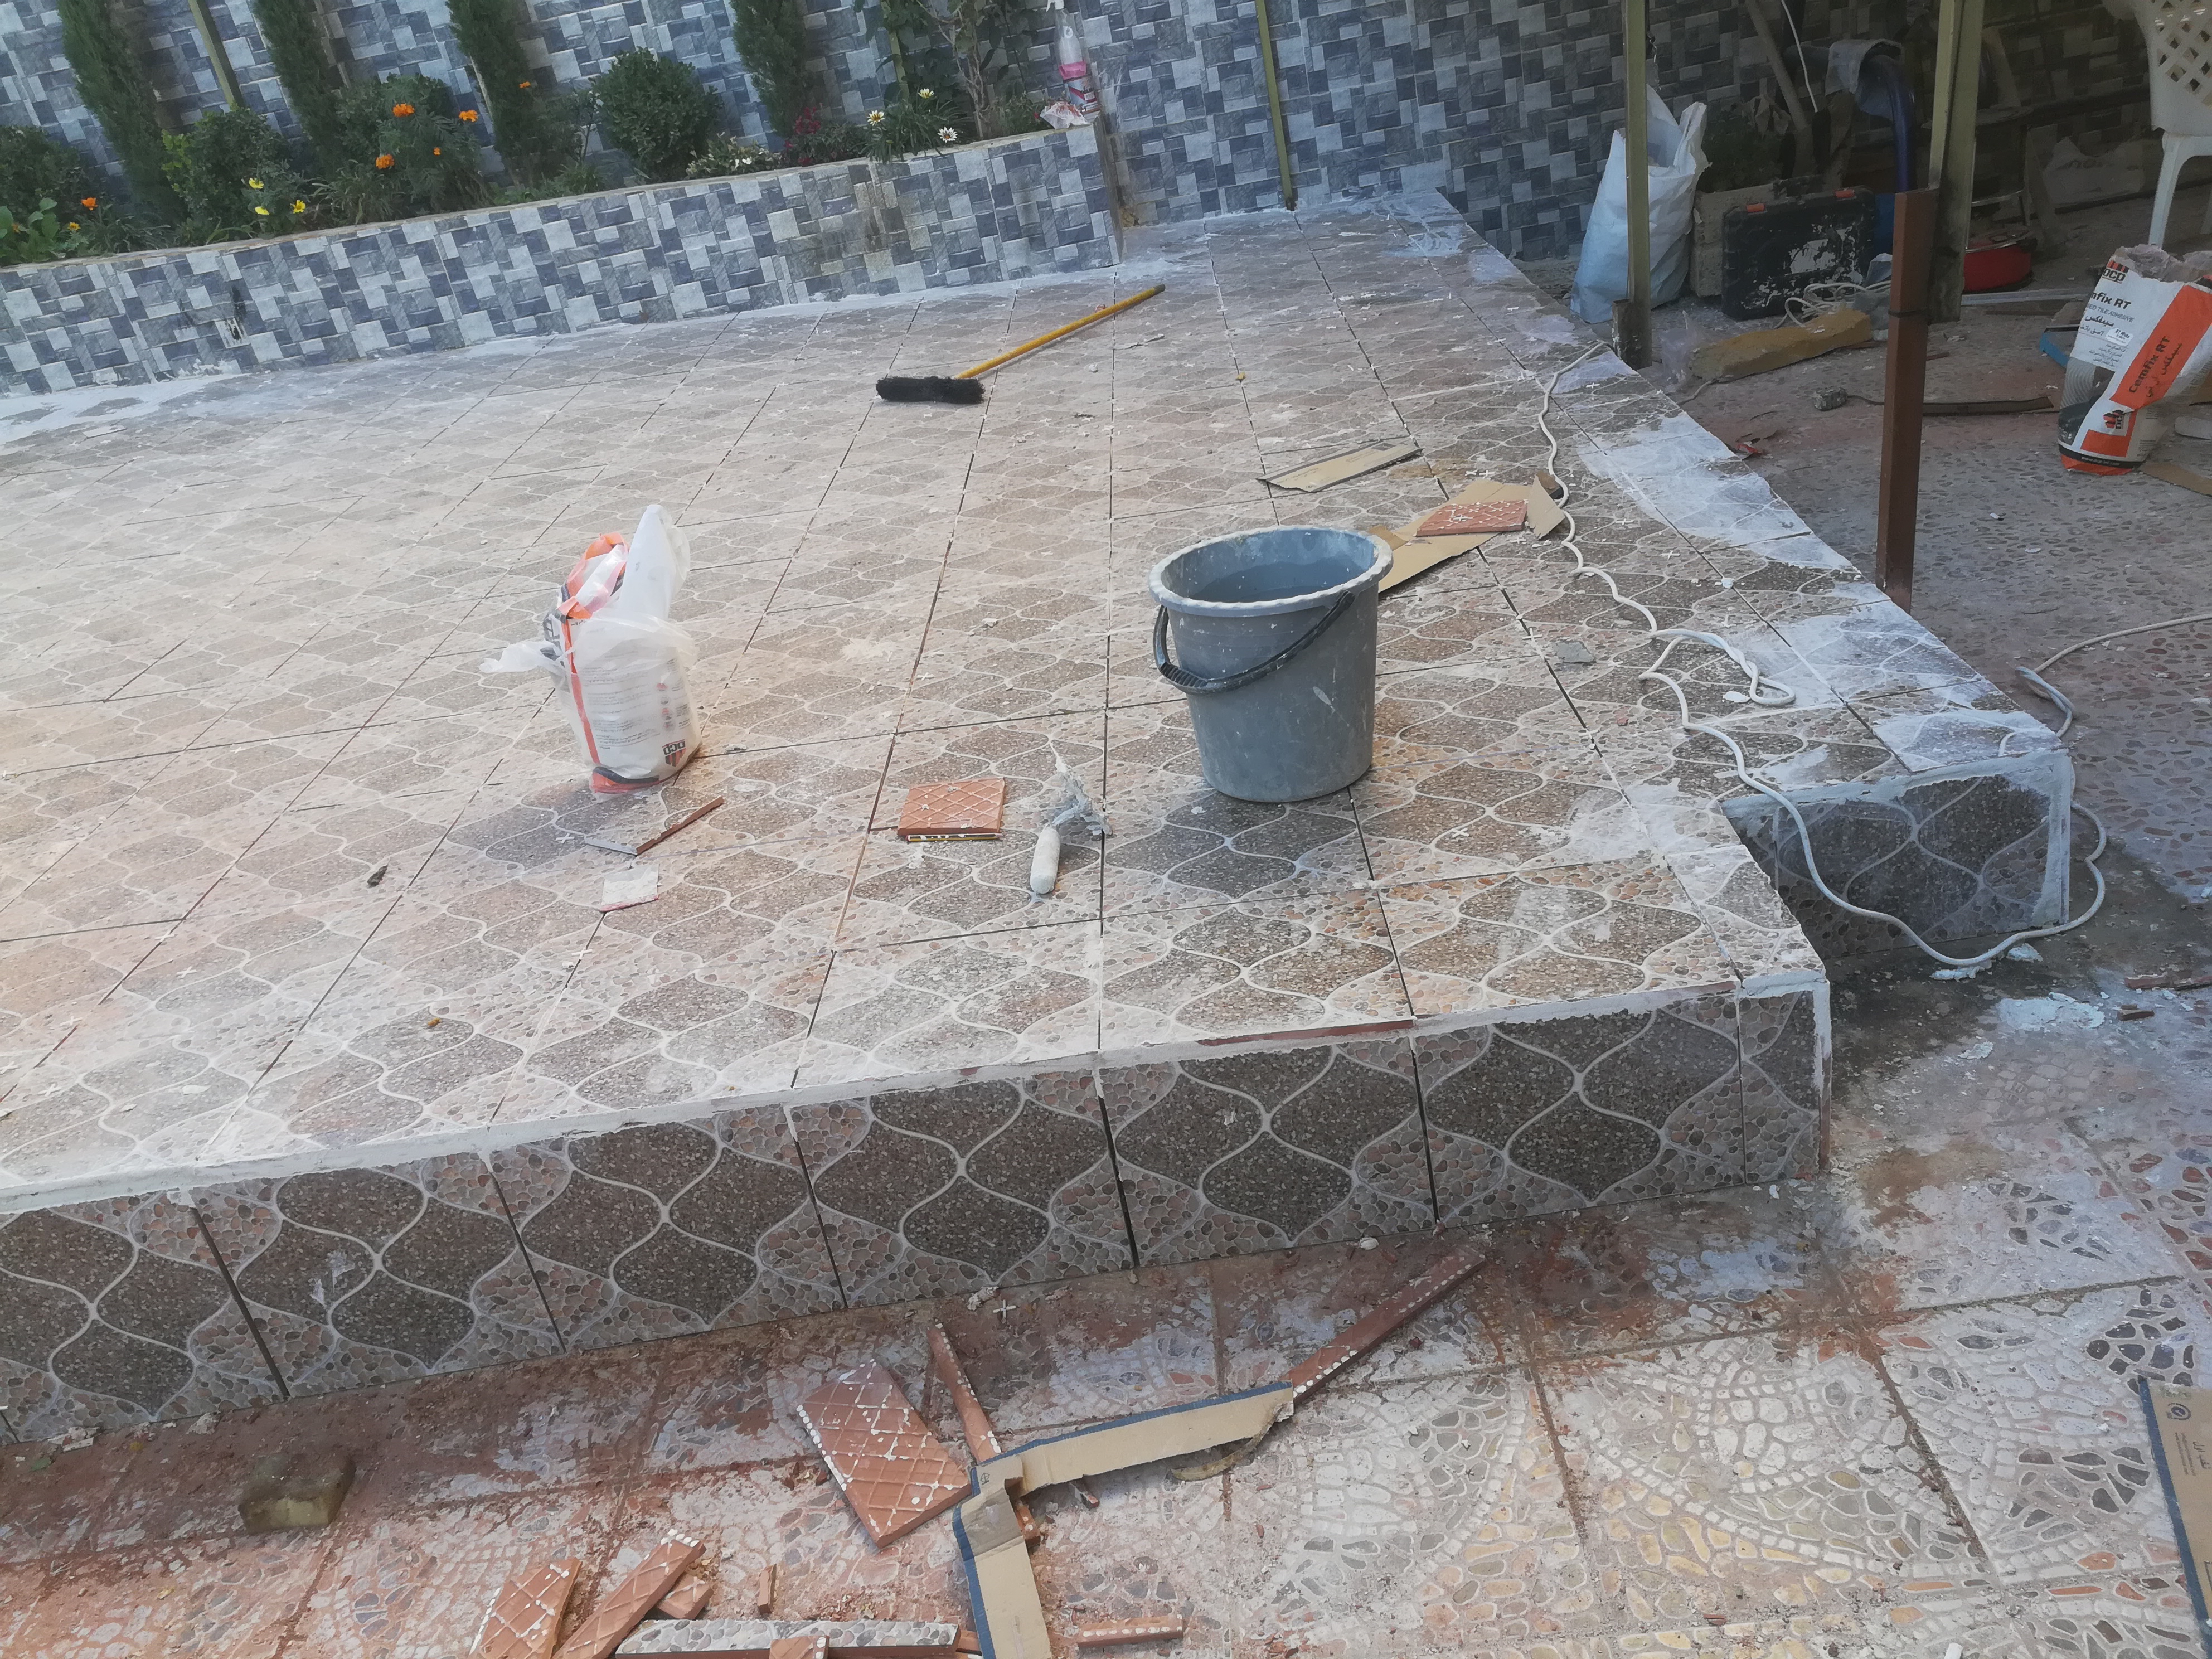 KCJ landscaping provide luxurious swimming pool construction in Dubai. We have constructed several customized swimming pools for our clients in Dubai in the las-  بليط معلم طينه ولاسق...